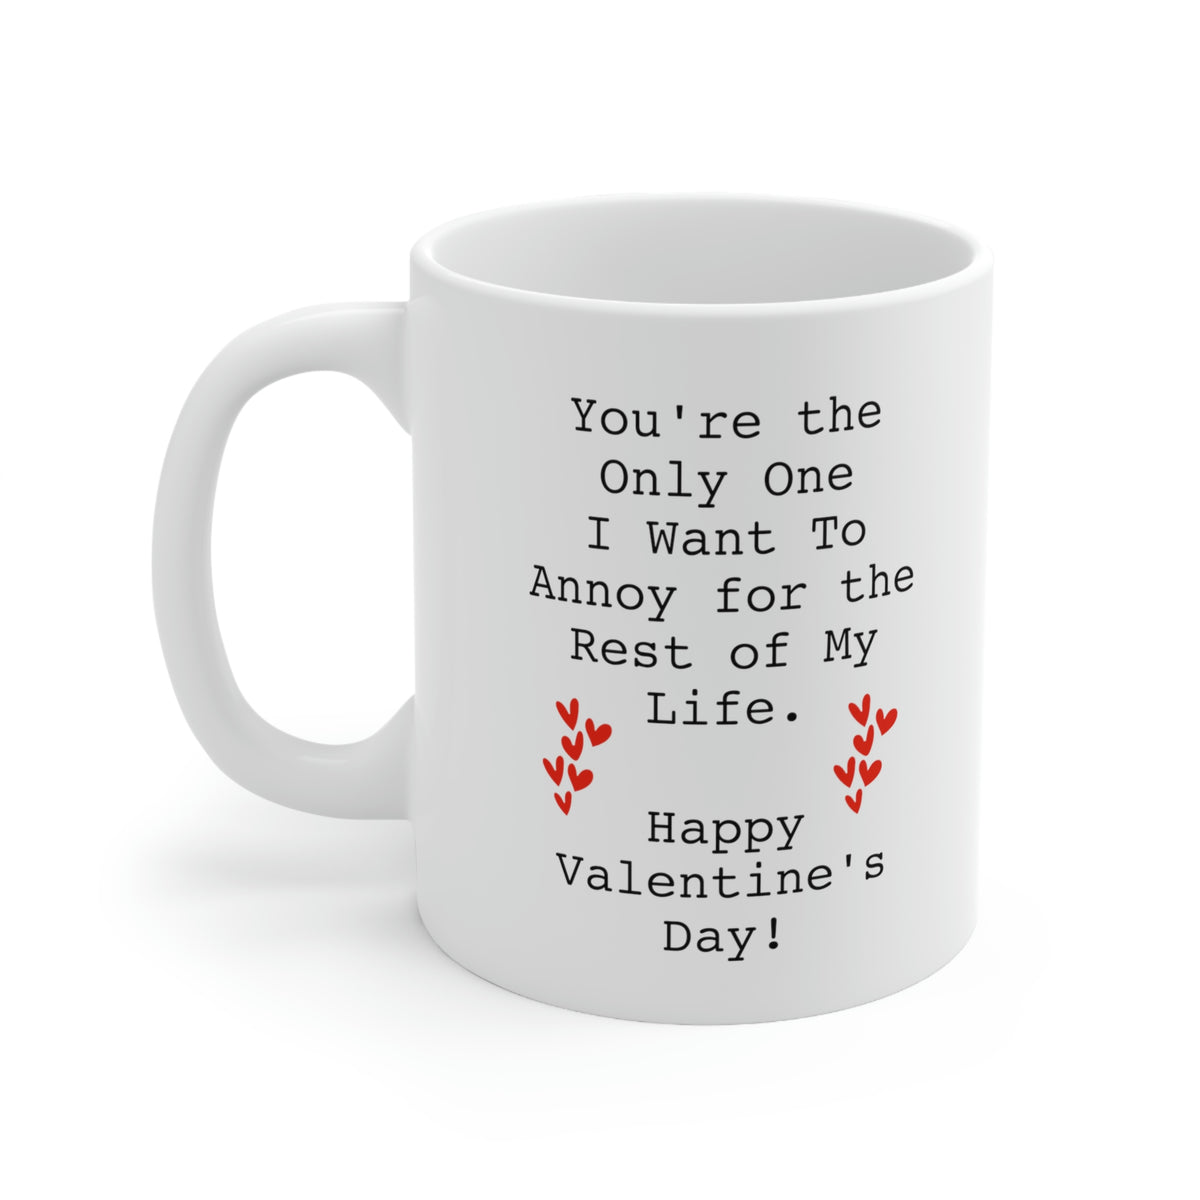 Valentins Day, You're the Only One I want To Annoy for the Rest of My Life, Funny Coffee Mug For Him Her, Love Cup For Wife Husband